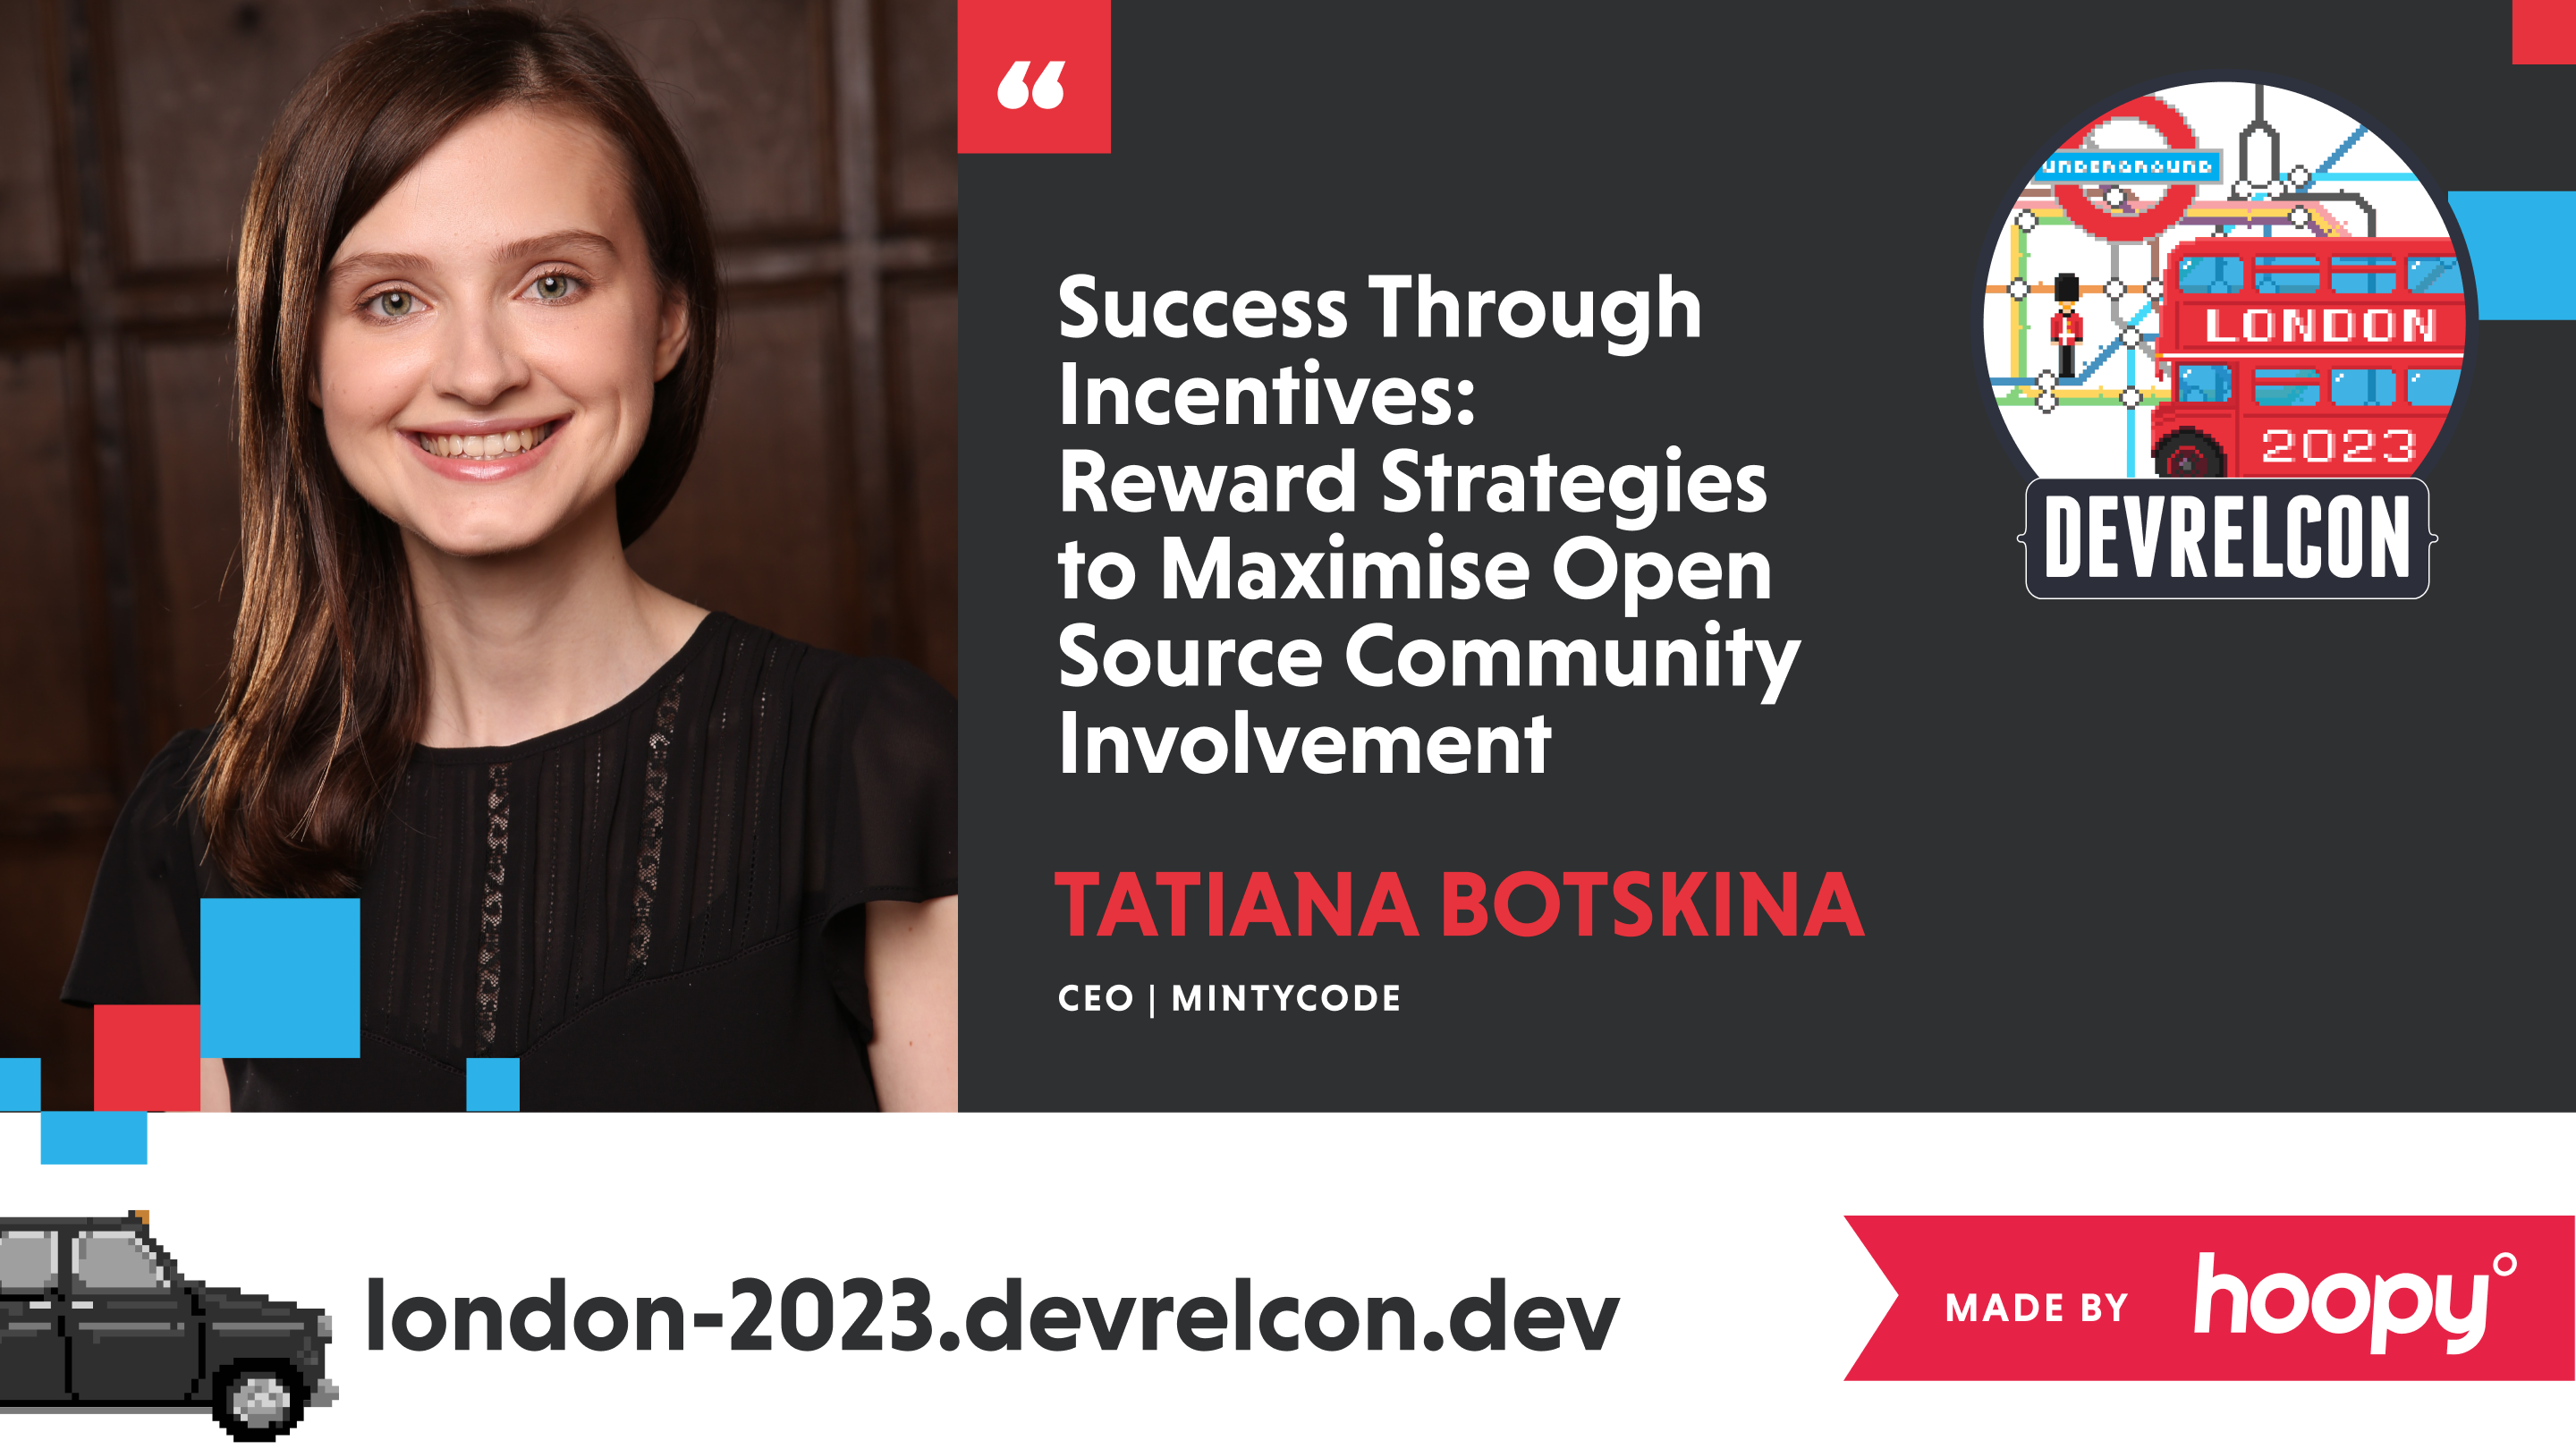 The image is a promotional graphic for a talk by Tatiana Botskina at DevRelCon London 2023. In the photo, Tatiana, with a pleasant smile, is featured against a professional backdrop. The text next to her reads "Success Through Incentives: Reward Strategies to Maximise Open Source Community Involvement," indicating the topic of her presentation. It suggests a focus on how rewarding contributors can enhance participation in open source projects. Tatiana is identified as the CEO of Mintycode. The graphic includes the DevRelCon logo with a stylized London theme, complete with the London Underground sign and a double-decker bus, marking the event's year as 2023. Additionally, the URL "london-2023.devrelcon.dev" is displayed at the bottom, along with the Hoopy logo, indicating that the graphic was created by or in association with Hoopy. The overall composition conveys a sense of innovation and community engagement in the tech industry.